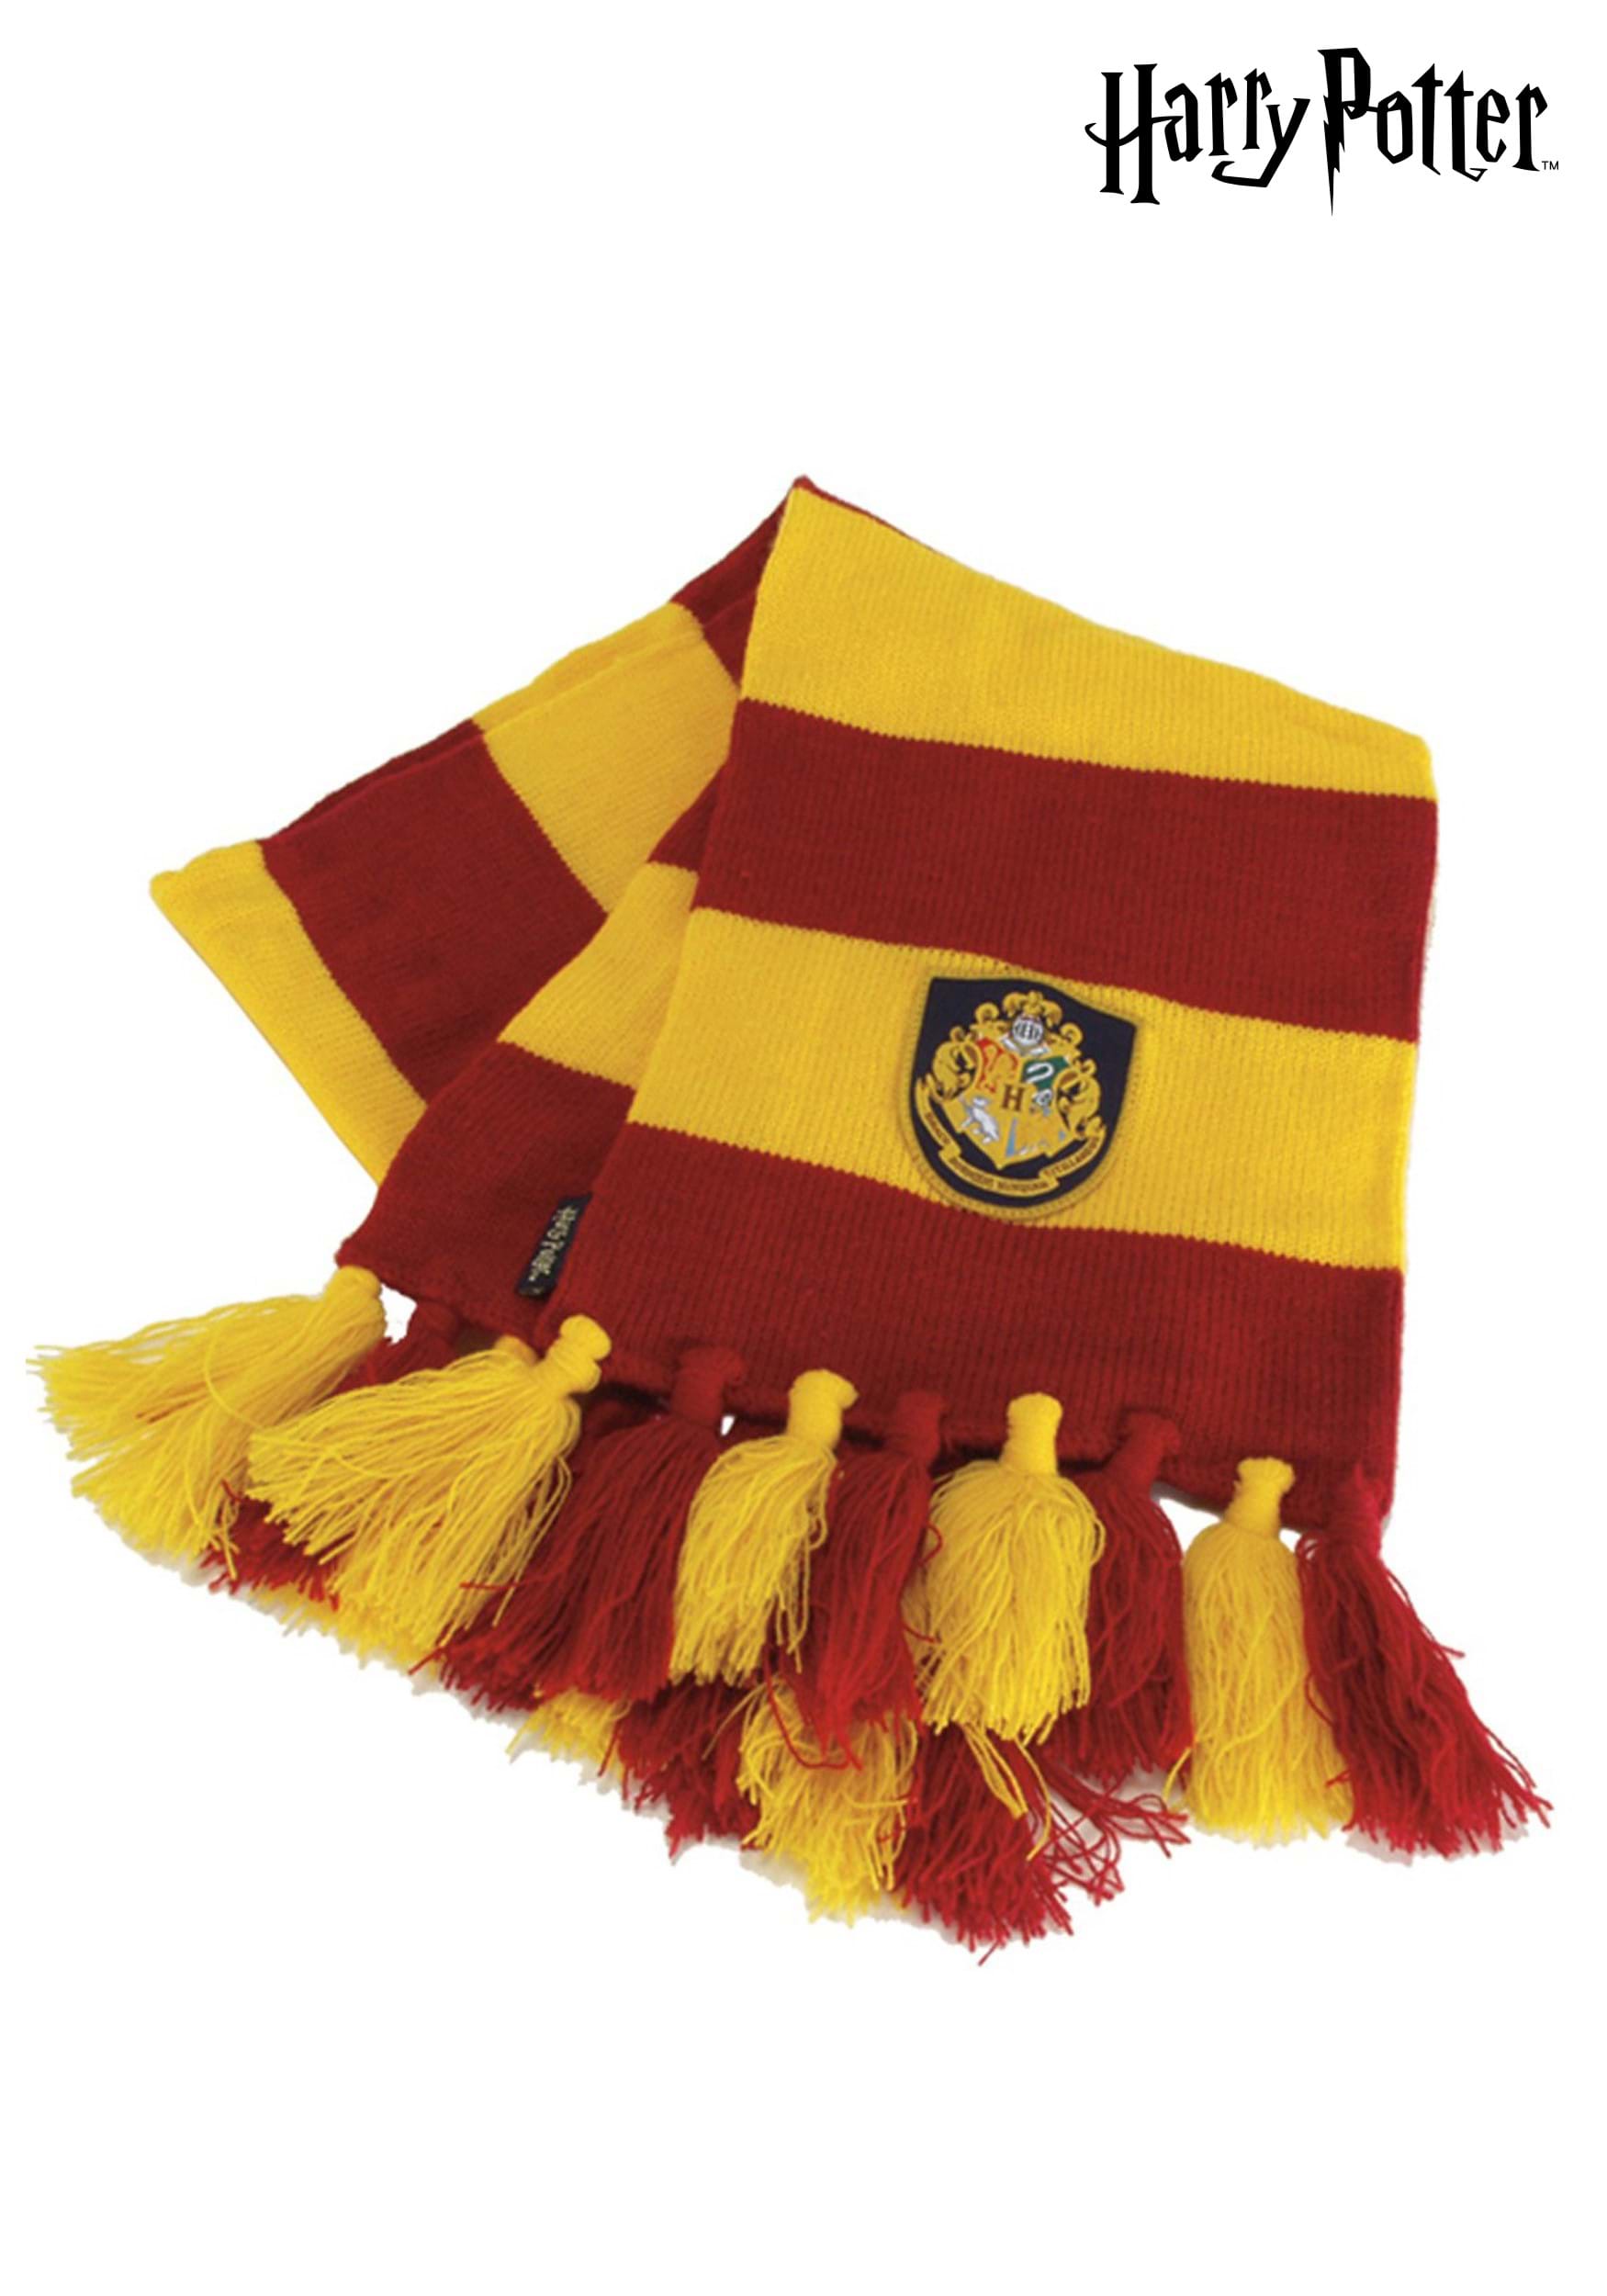 HARRY POTTER GRYFFINDOR SCARF PACK OF 2 FESTIVAL WRIST BAND FABRIC STRAP PHOENIX 